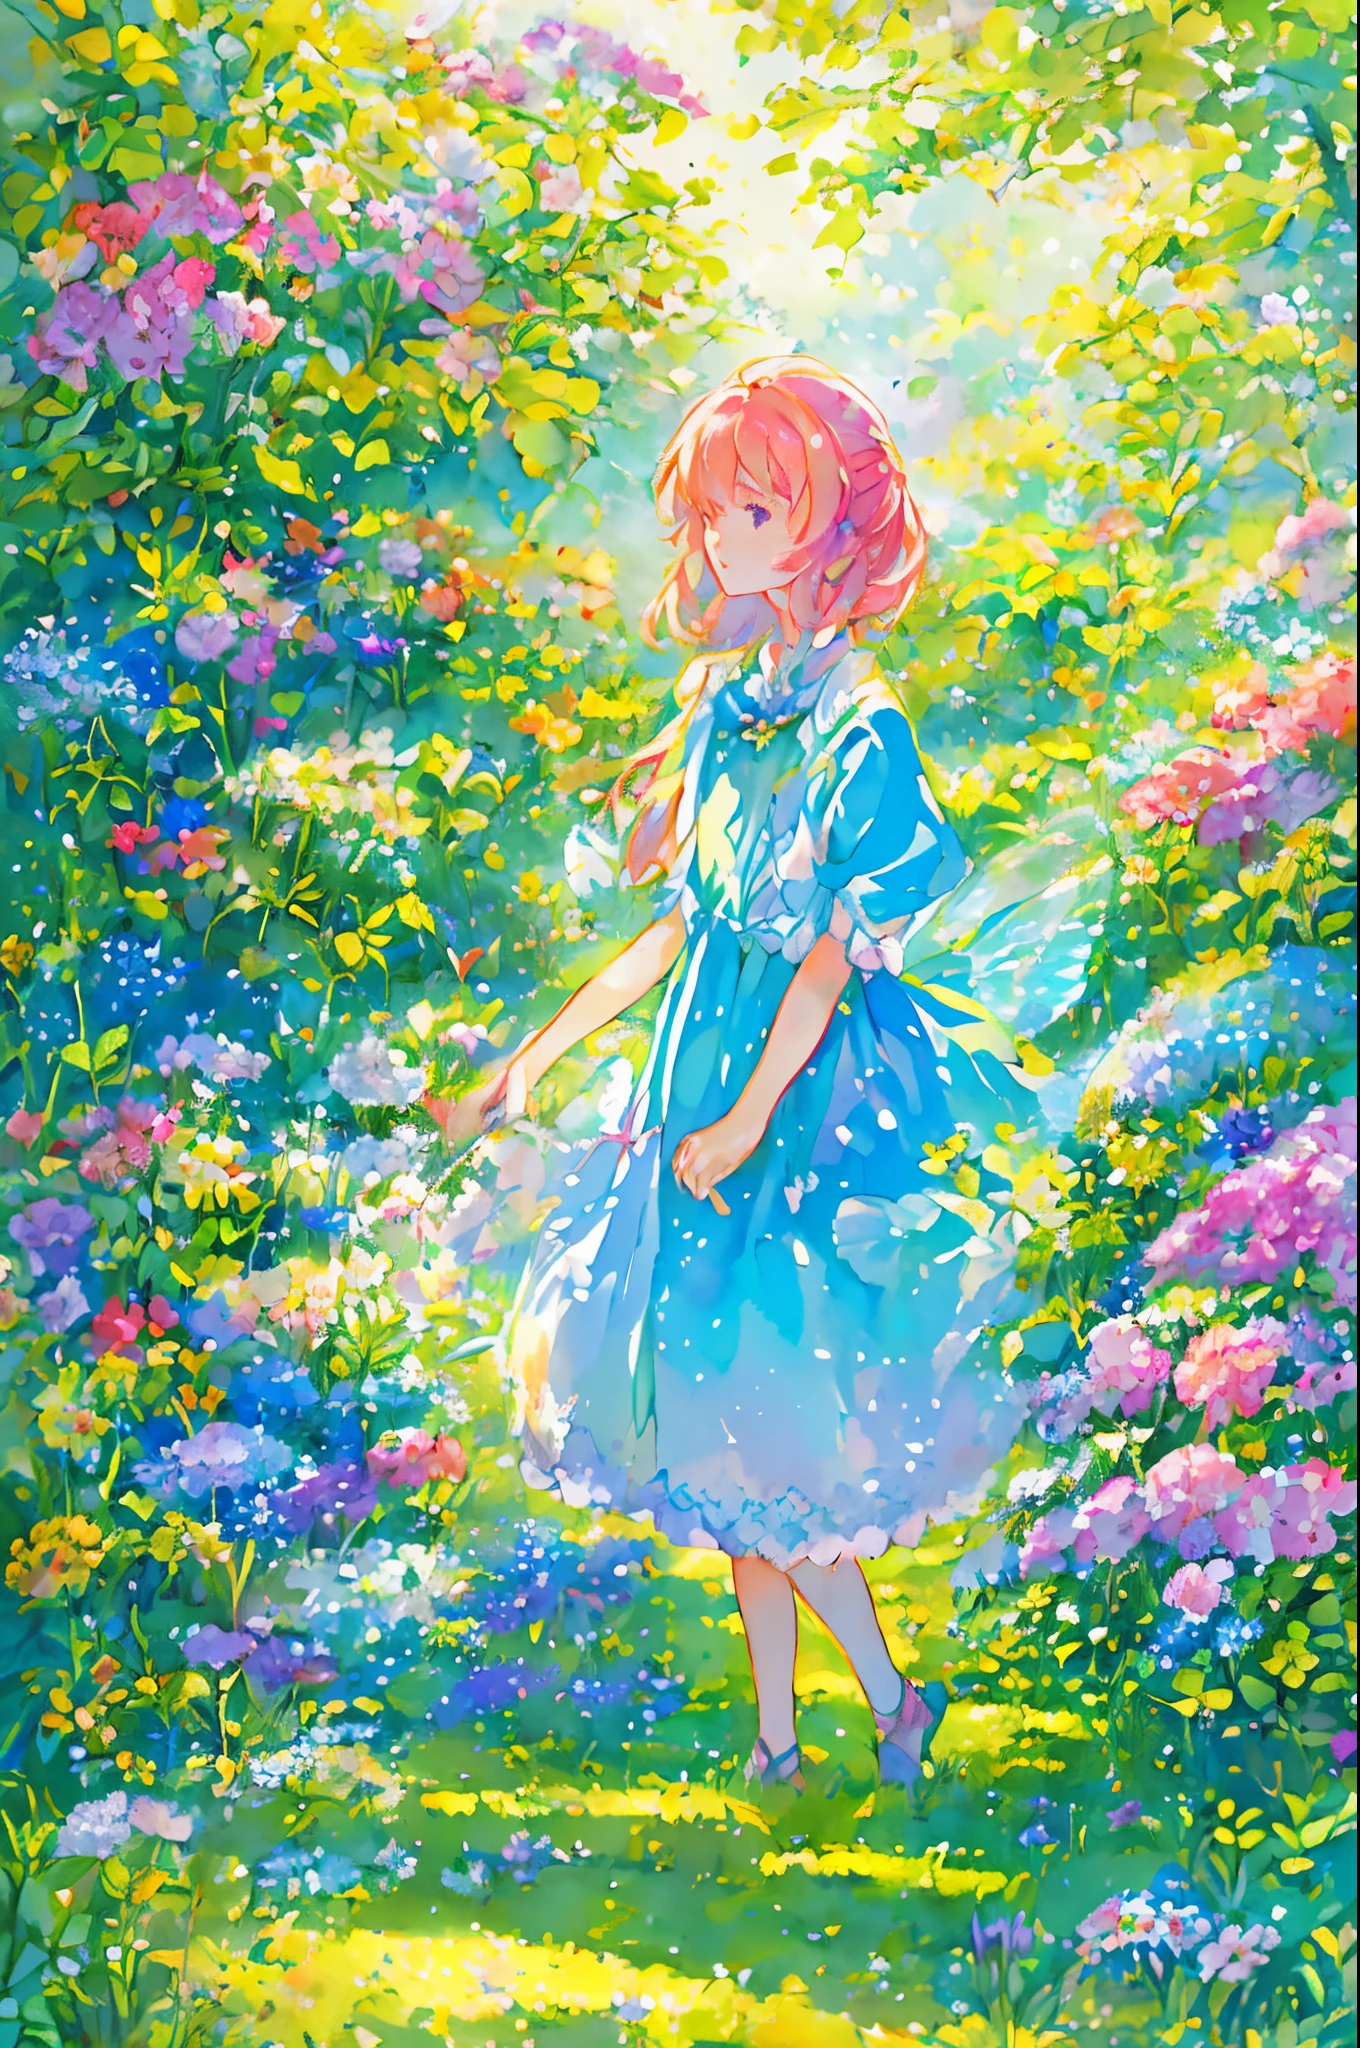 Beautiful girl in fairy costume, Surrounded by flowers and butterflies. Content: Watercolor painting. Style: Capricious and delicate, Like illustrations in children's books.